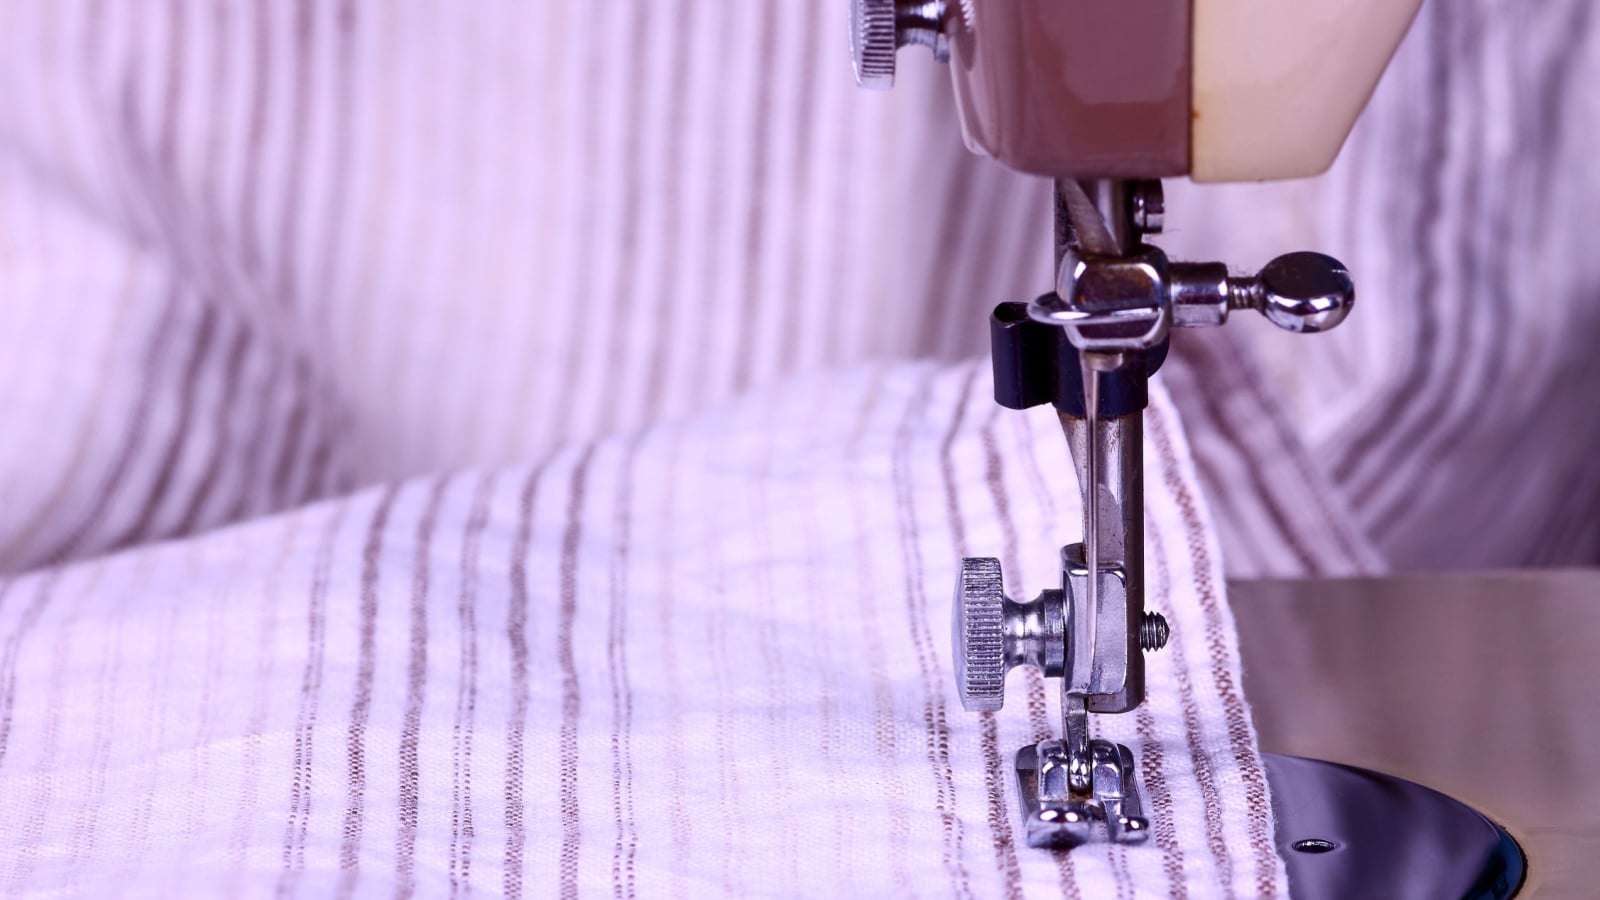 Striped cotton material and a vintage sewing machine in close up